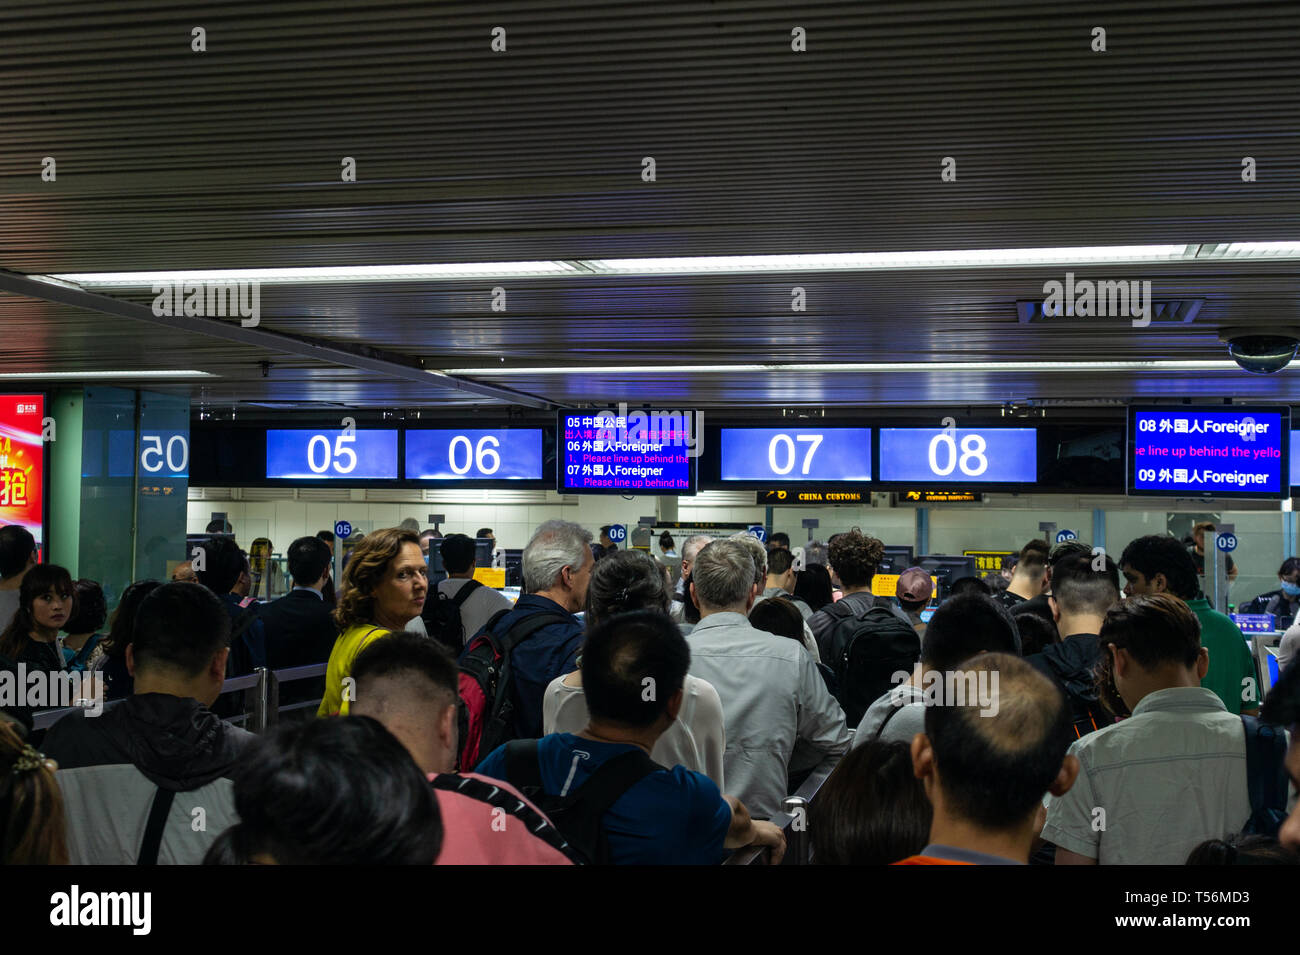 Border control at mainland China border, with queues for overseas or foreign visitors (foreigners) Stock Photo